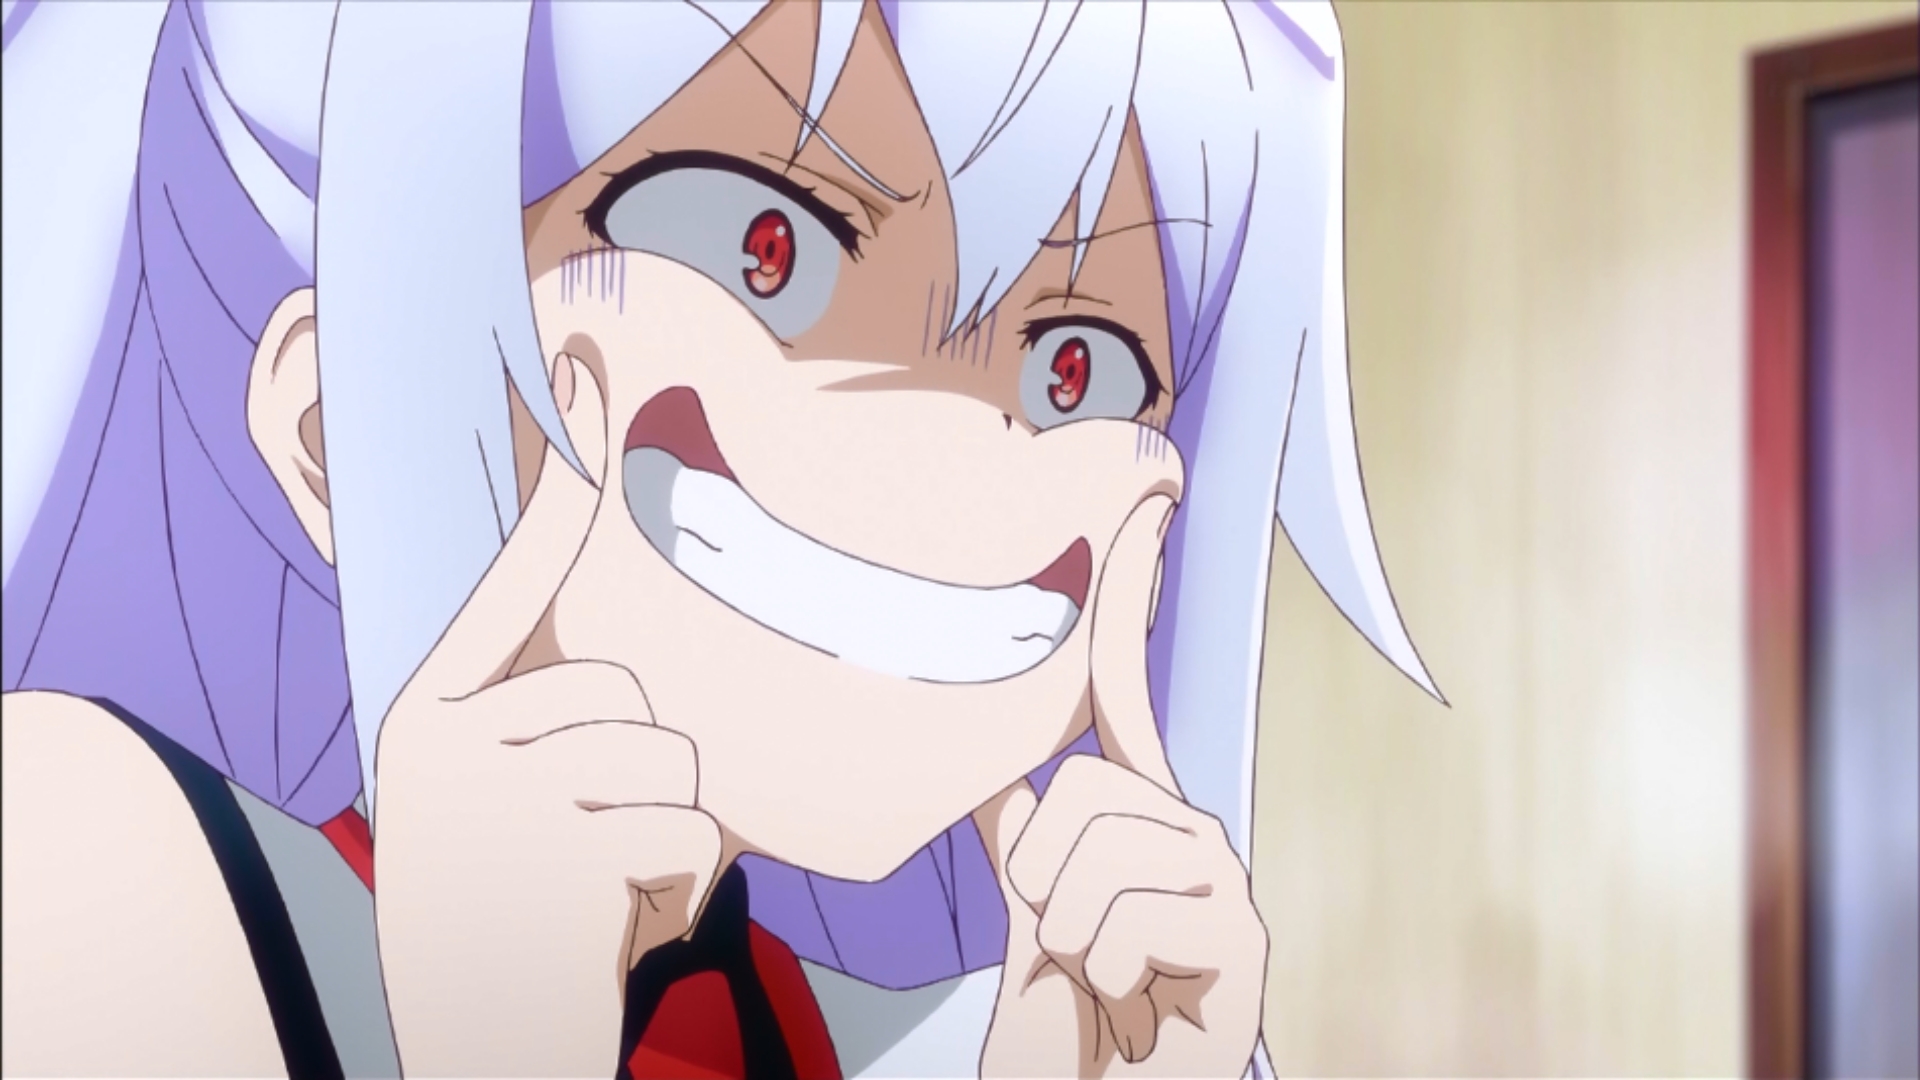 Review/discussion about: Plastic Memories